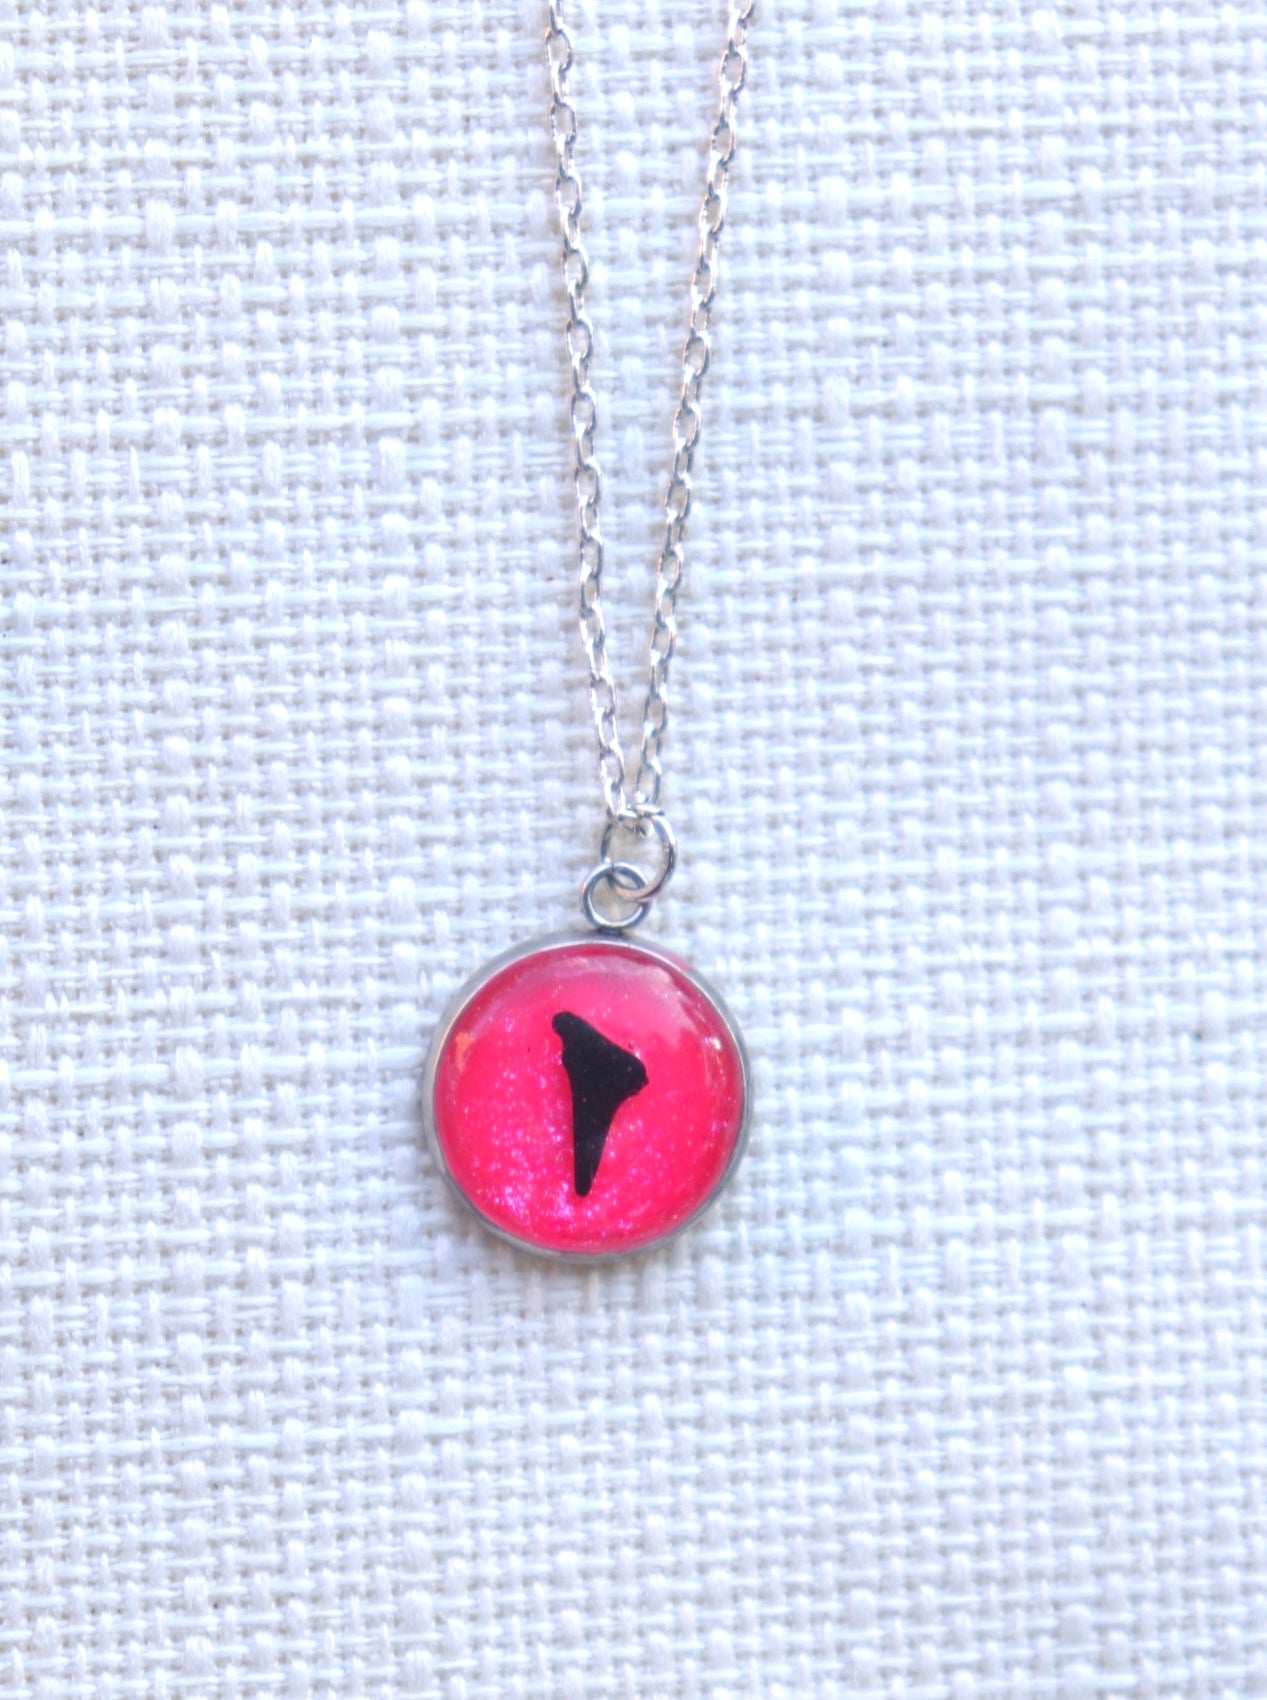 Mini shark tooth necklaces